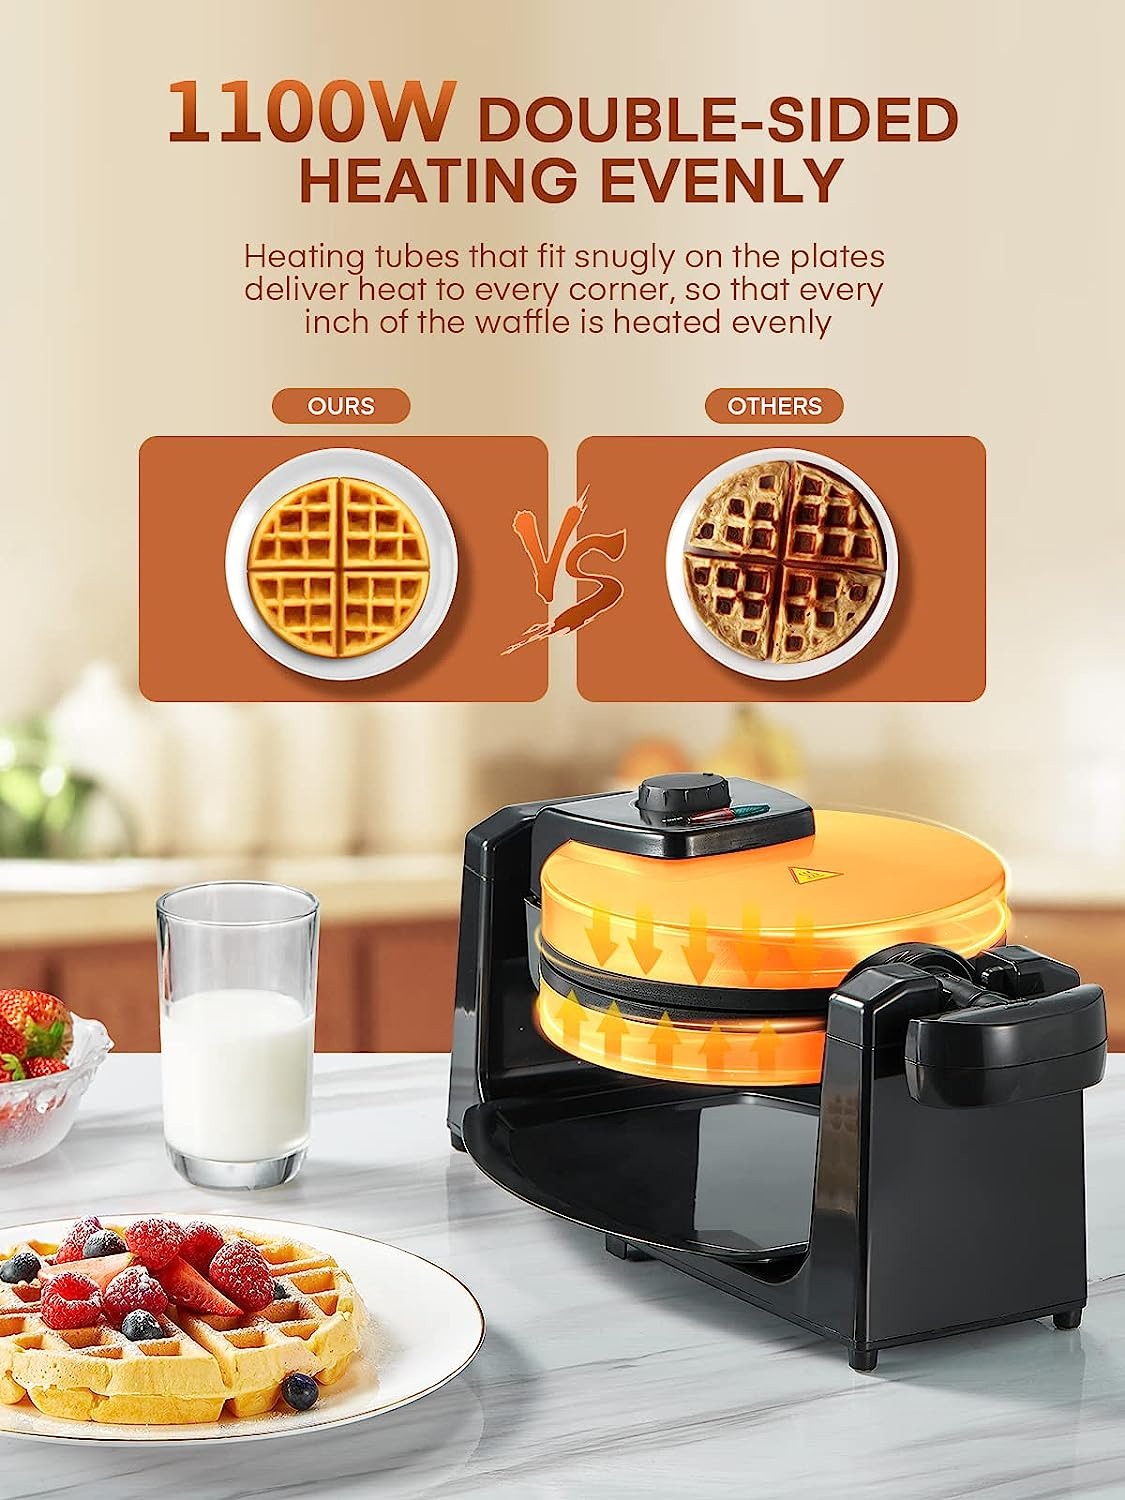 The Waffle Maker